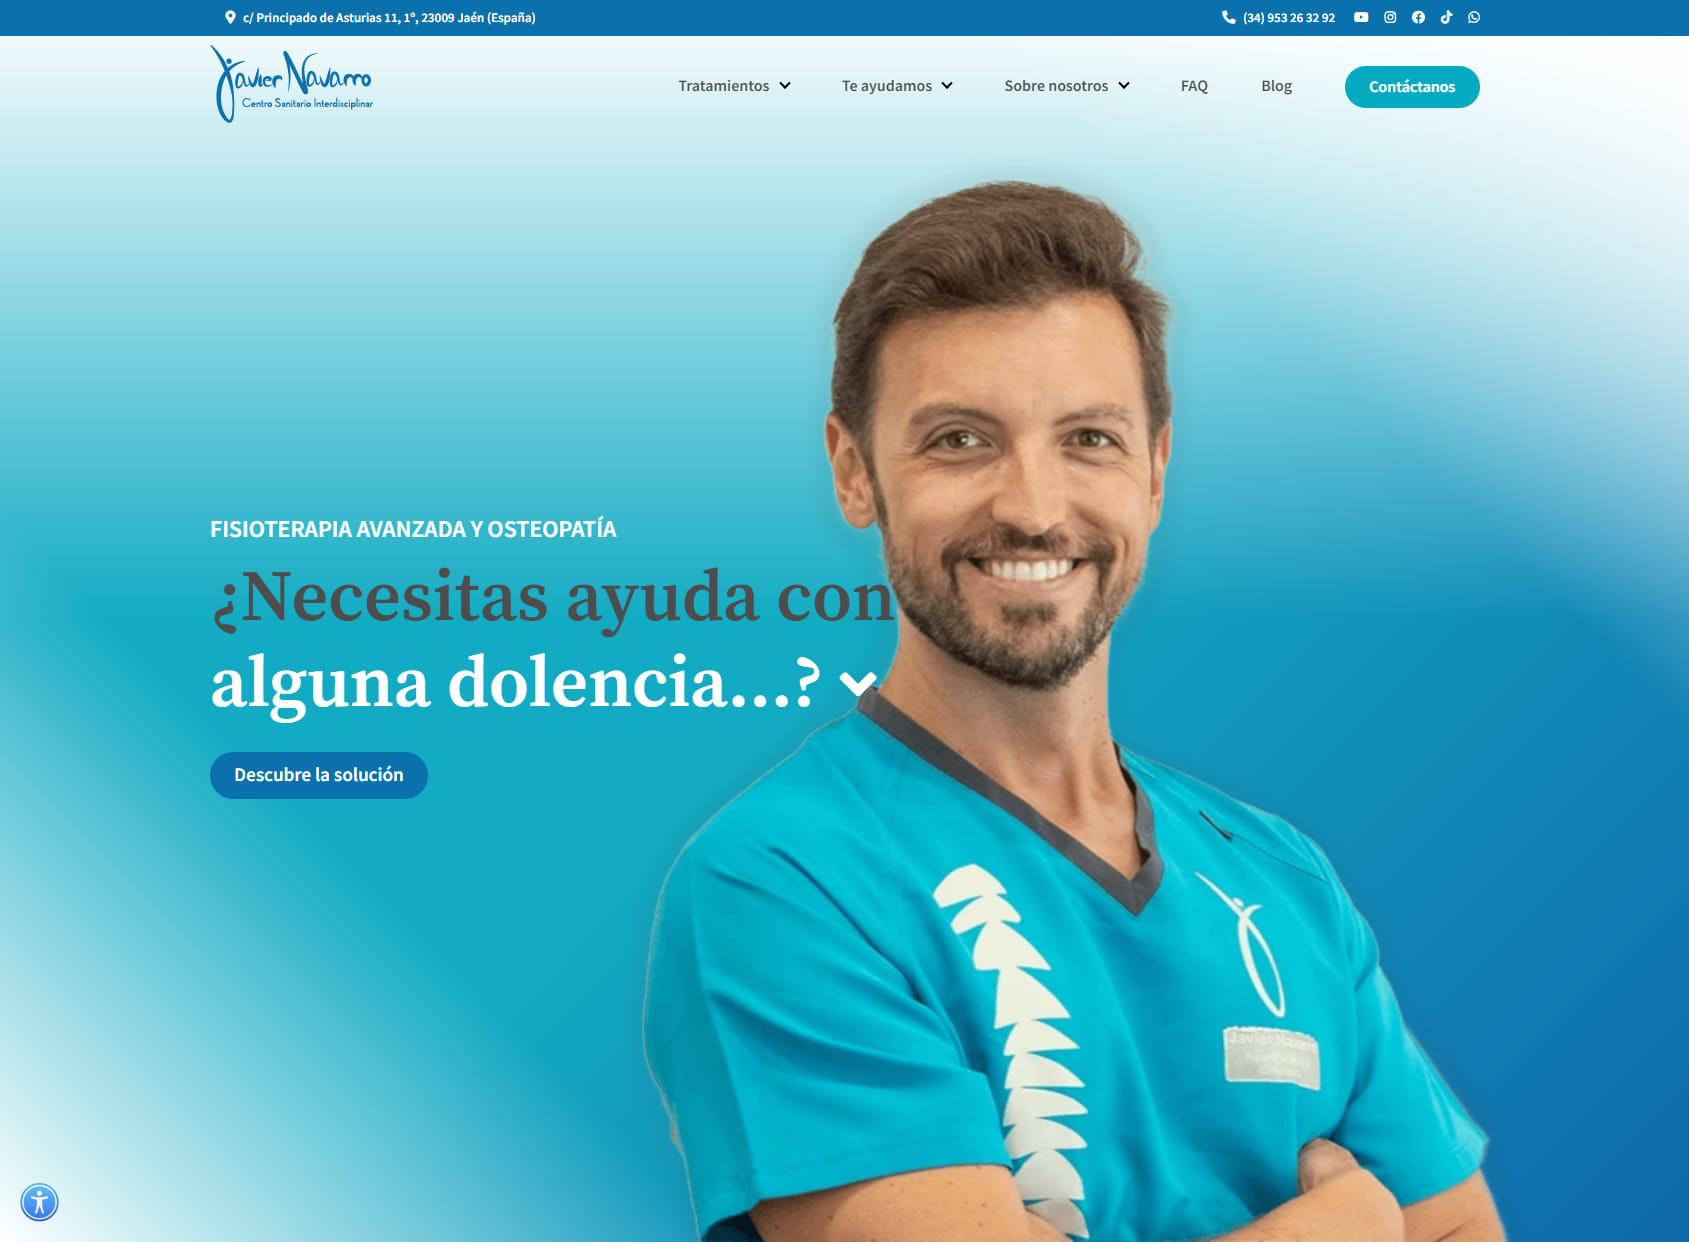 Javier Navarro Clinic - Advanced Physical Therapy & Osteopathy